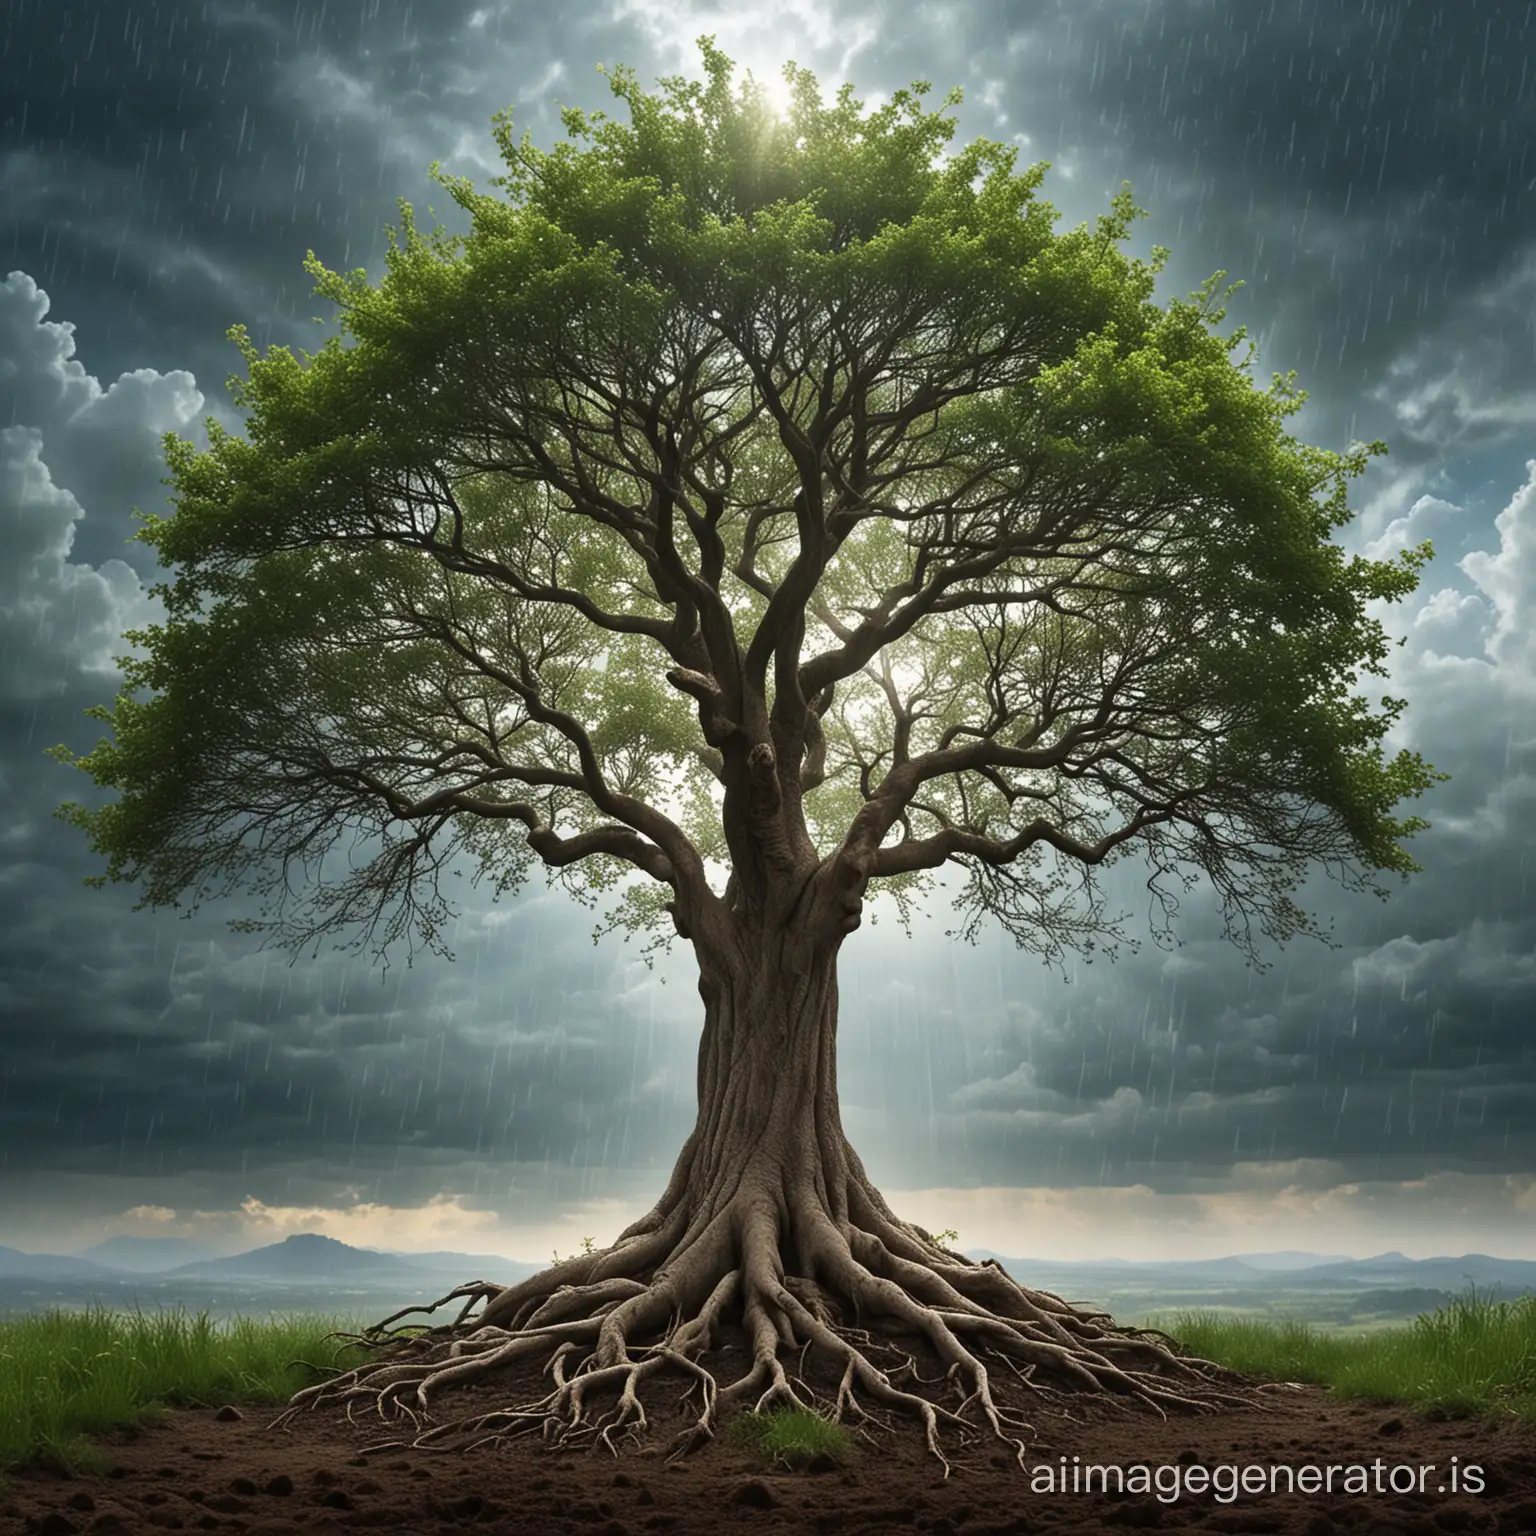 Steadfast-Growth-A-Symbolic-Tree-of-Resilience-and-Progress